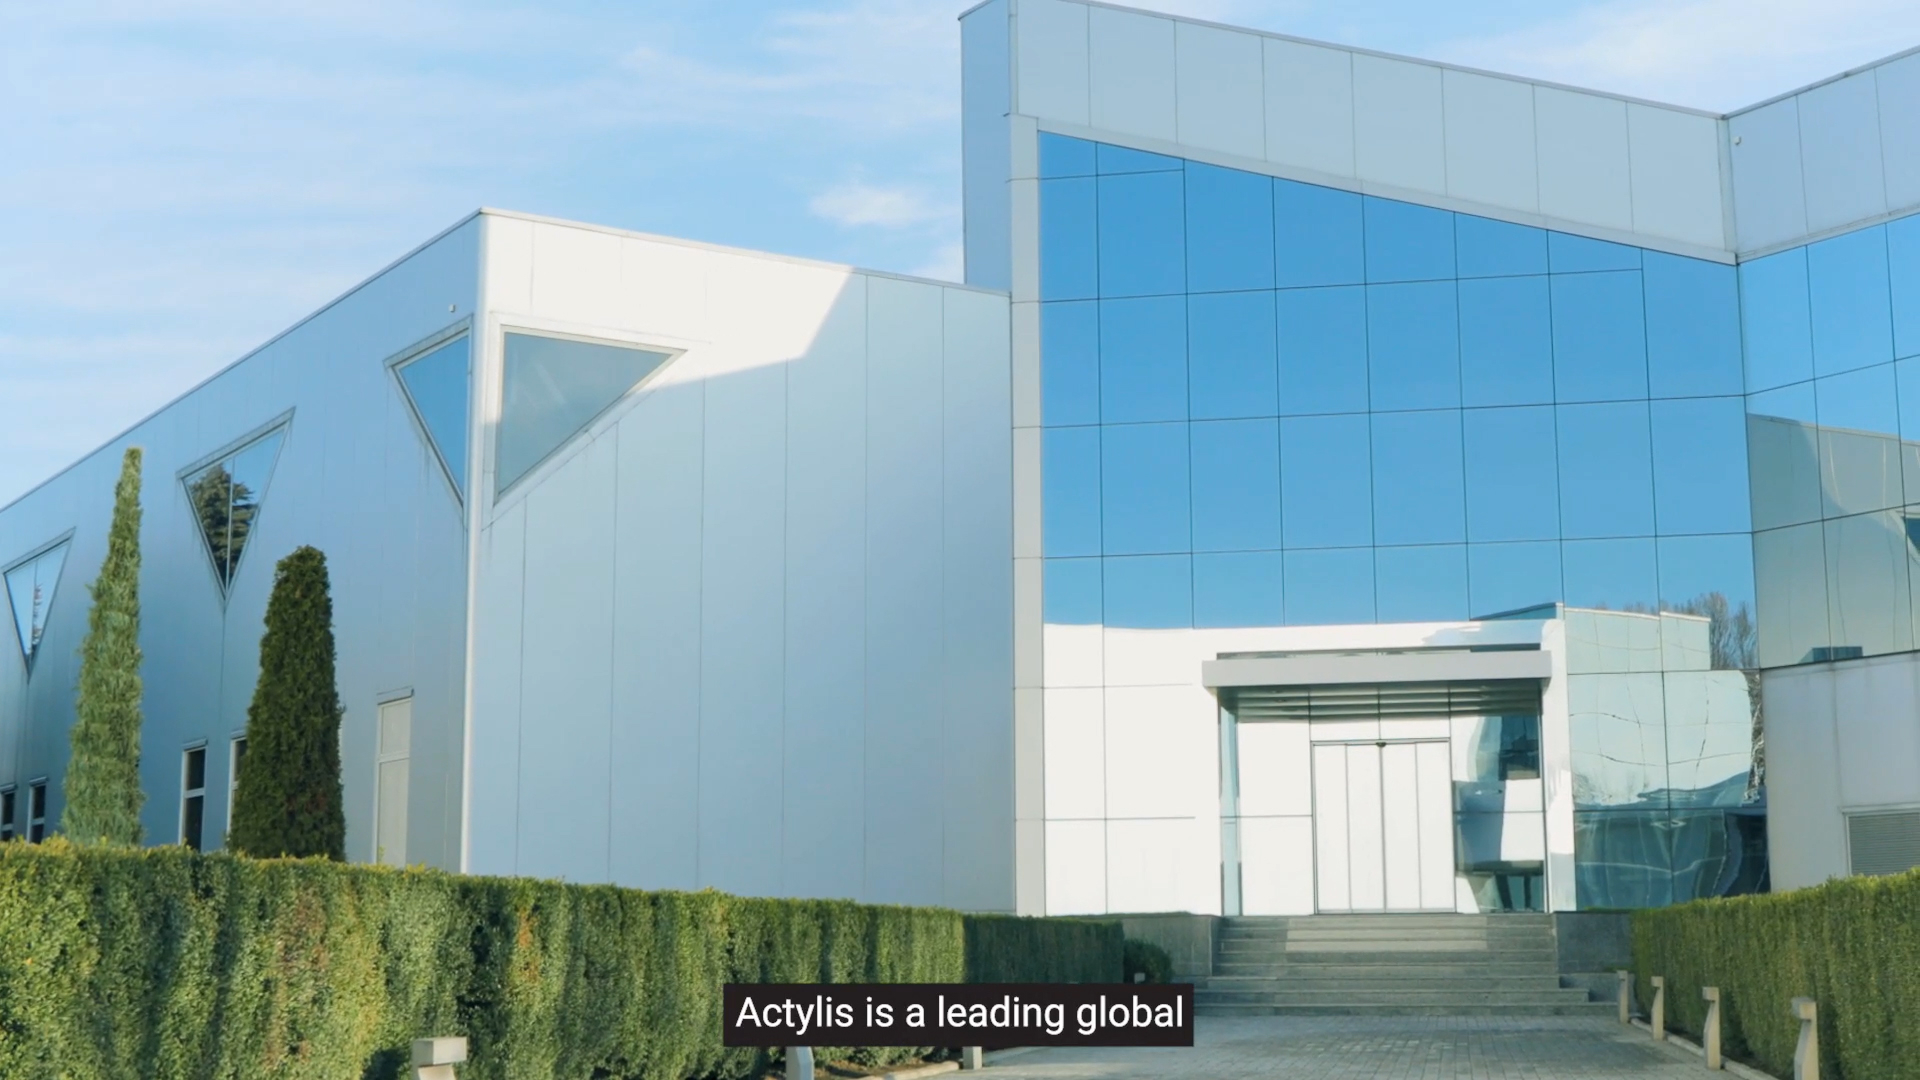 Watch this video to learn more about Actylis, the newly launched integrated global specialty ingredients manufacturing and sourcing powerhouse.